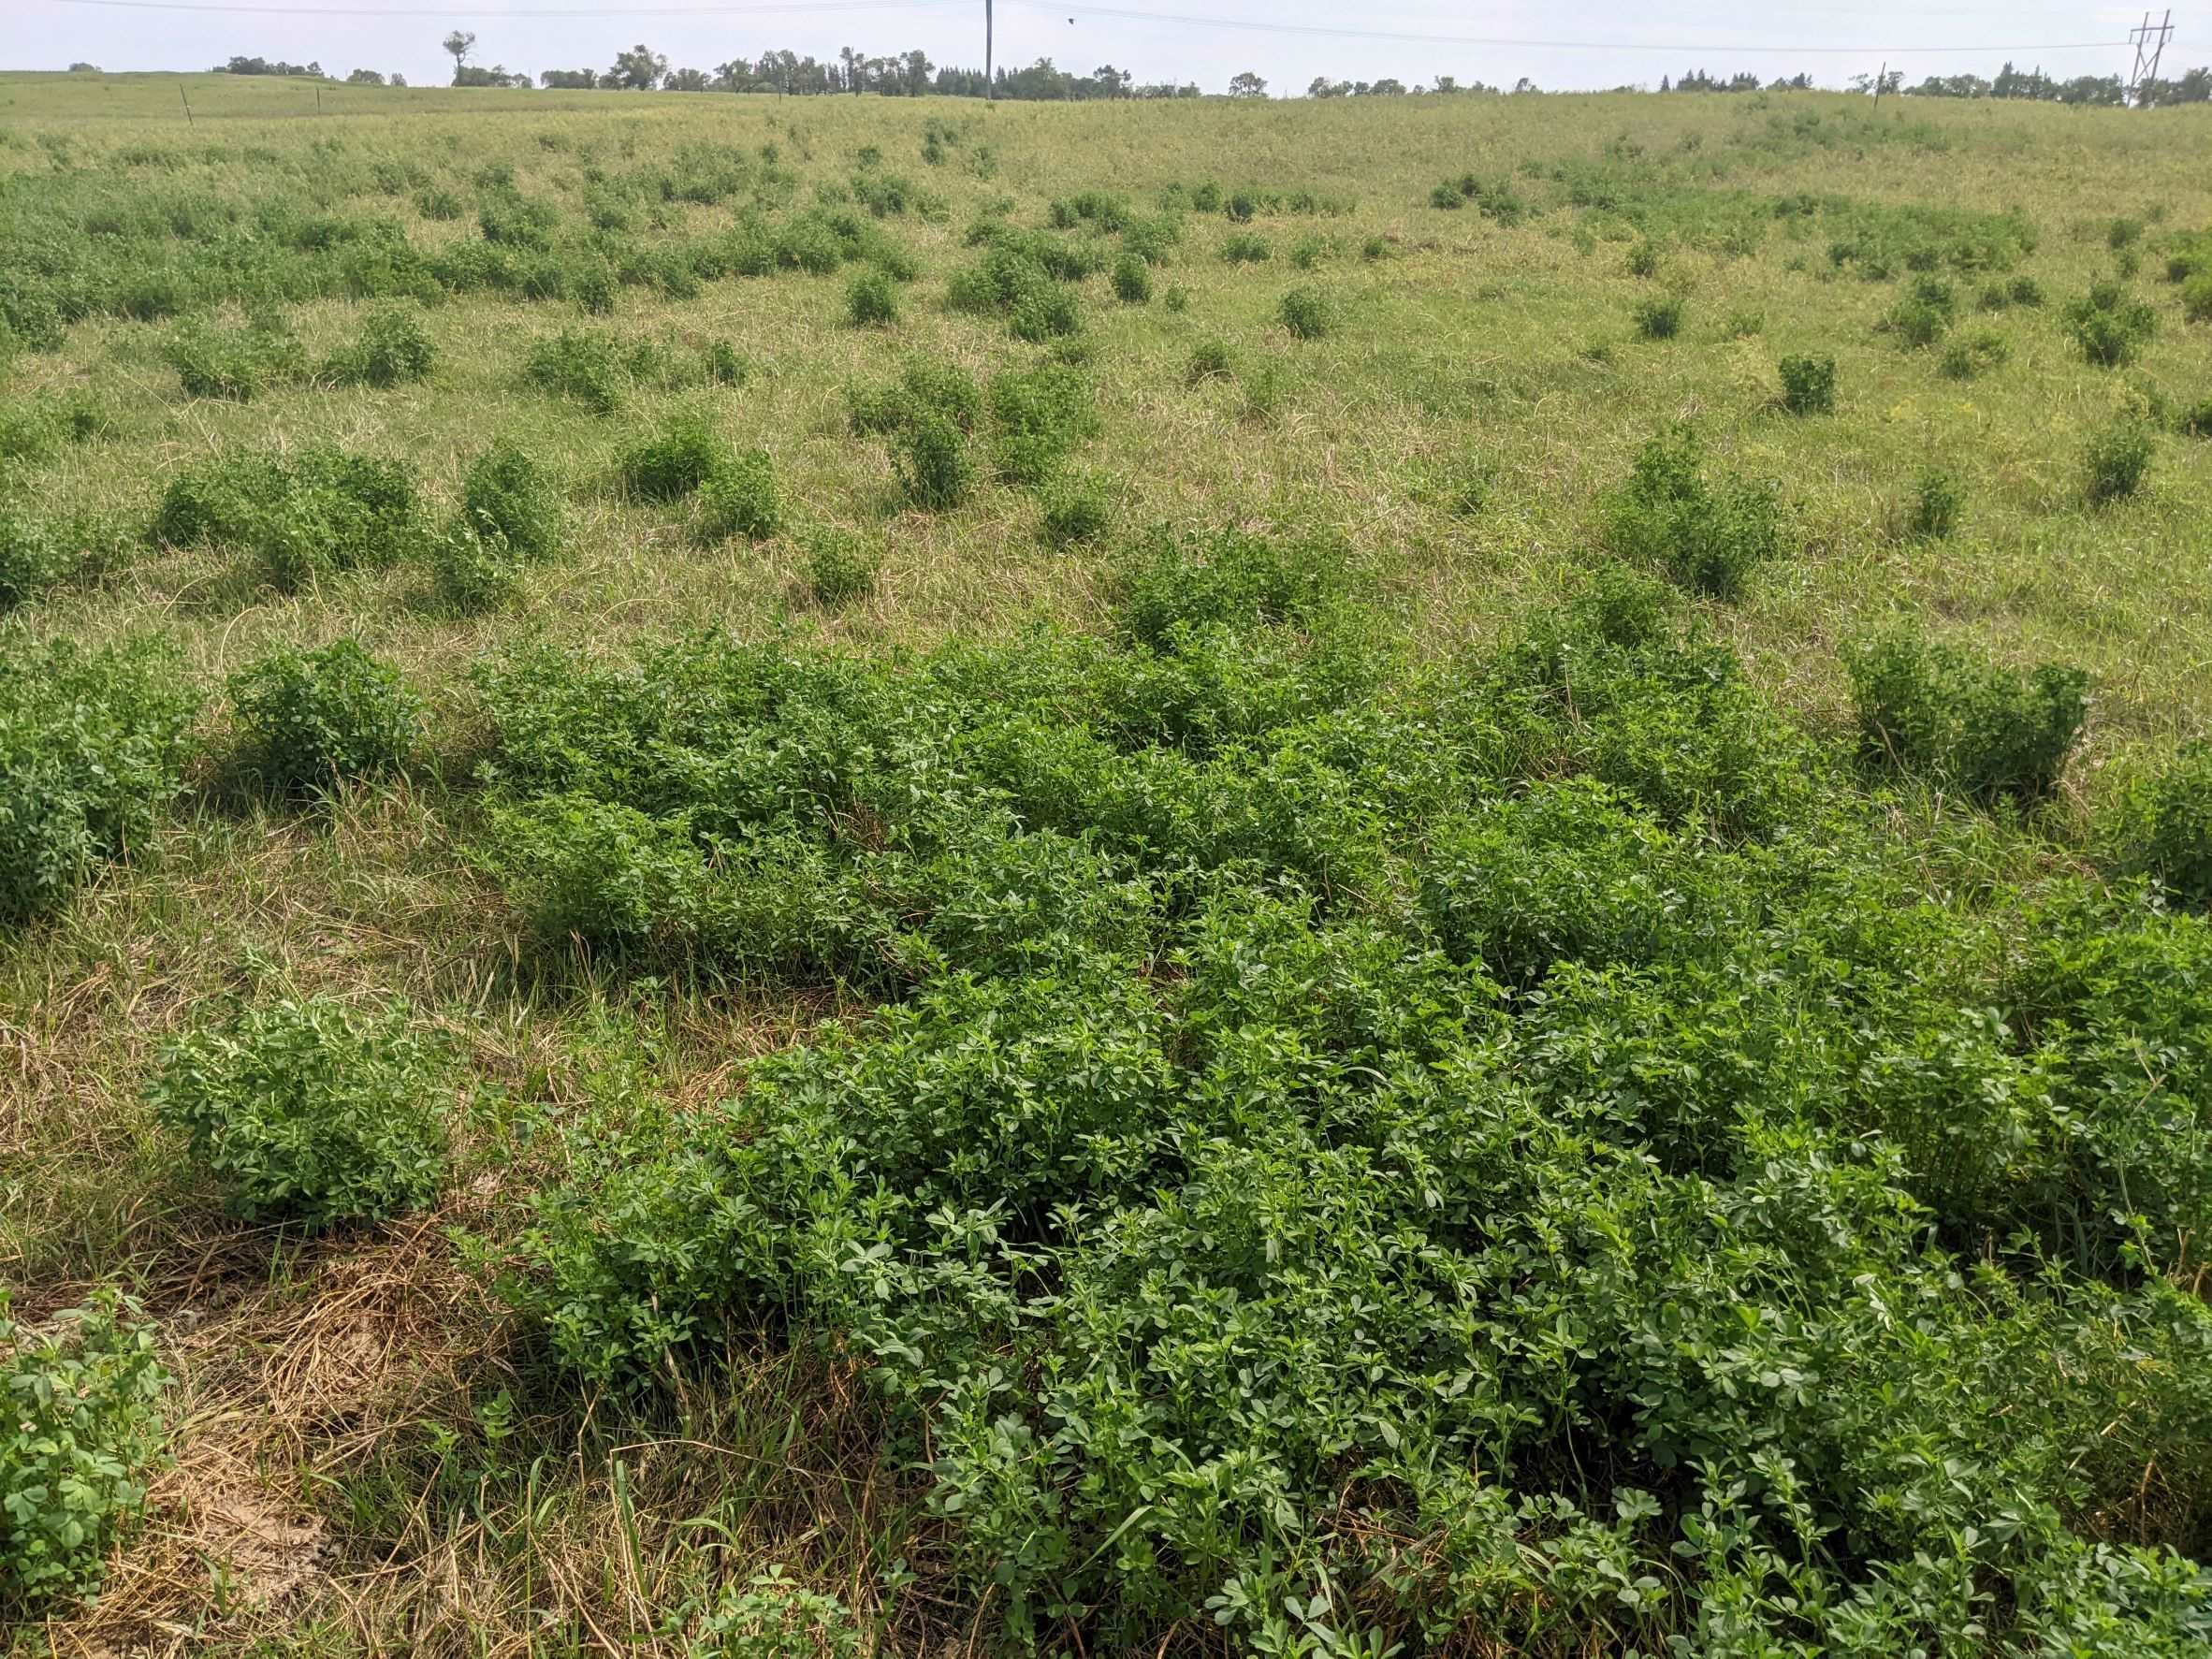 Alfalfa regrowth after grazing on a 2018 mob seeded plot